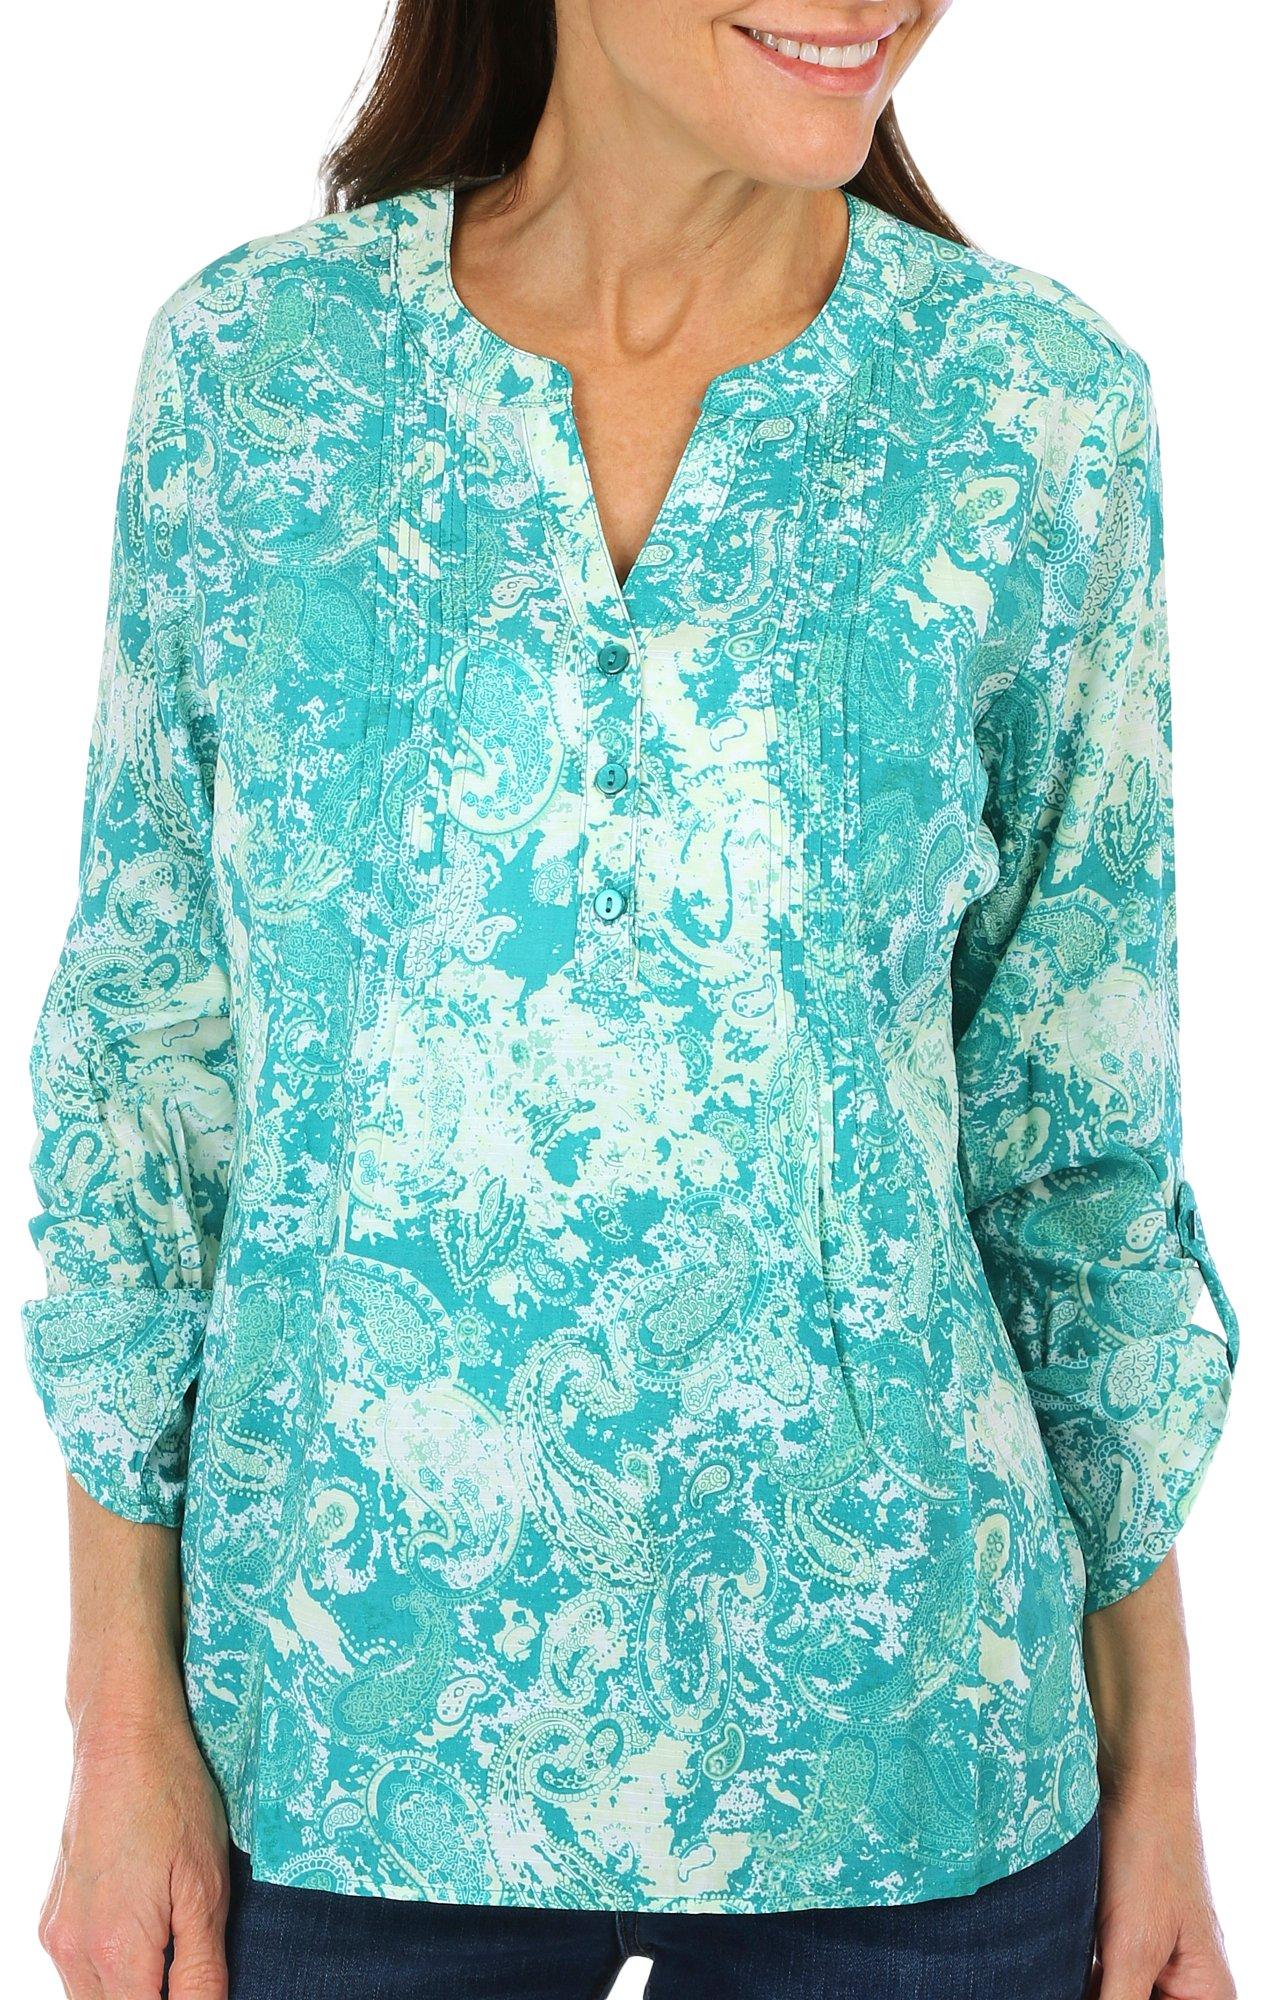 Juniper + Lime Petite Paisley 3/4 Sleeve Silky Stretch Top